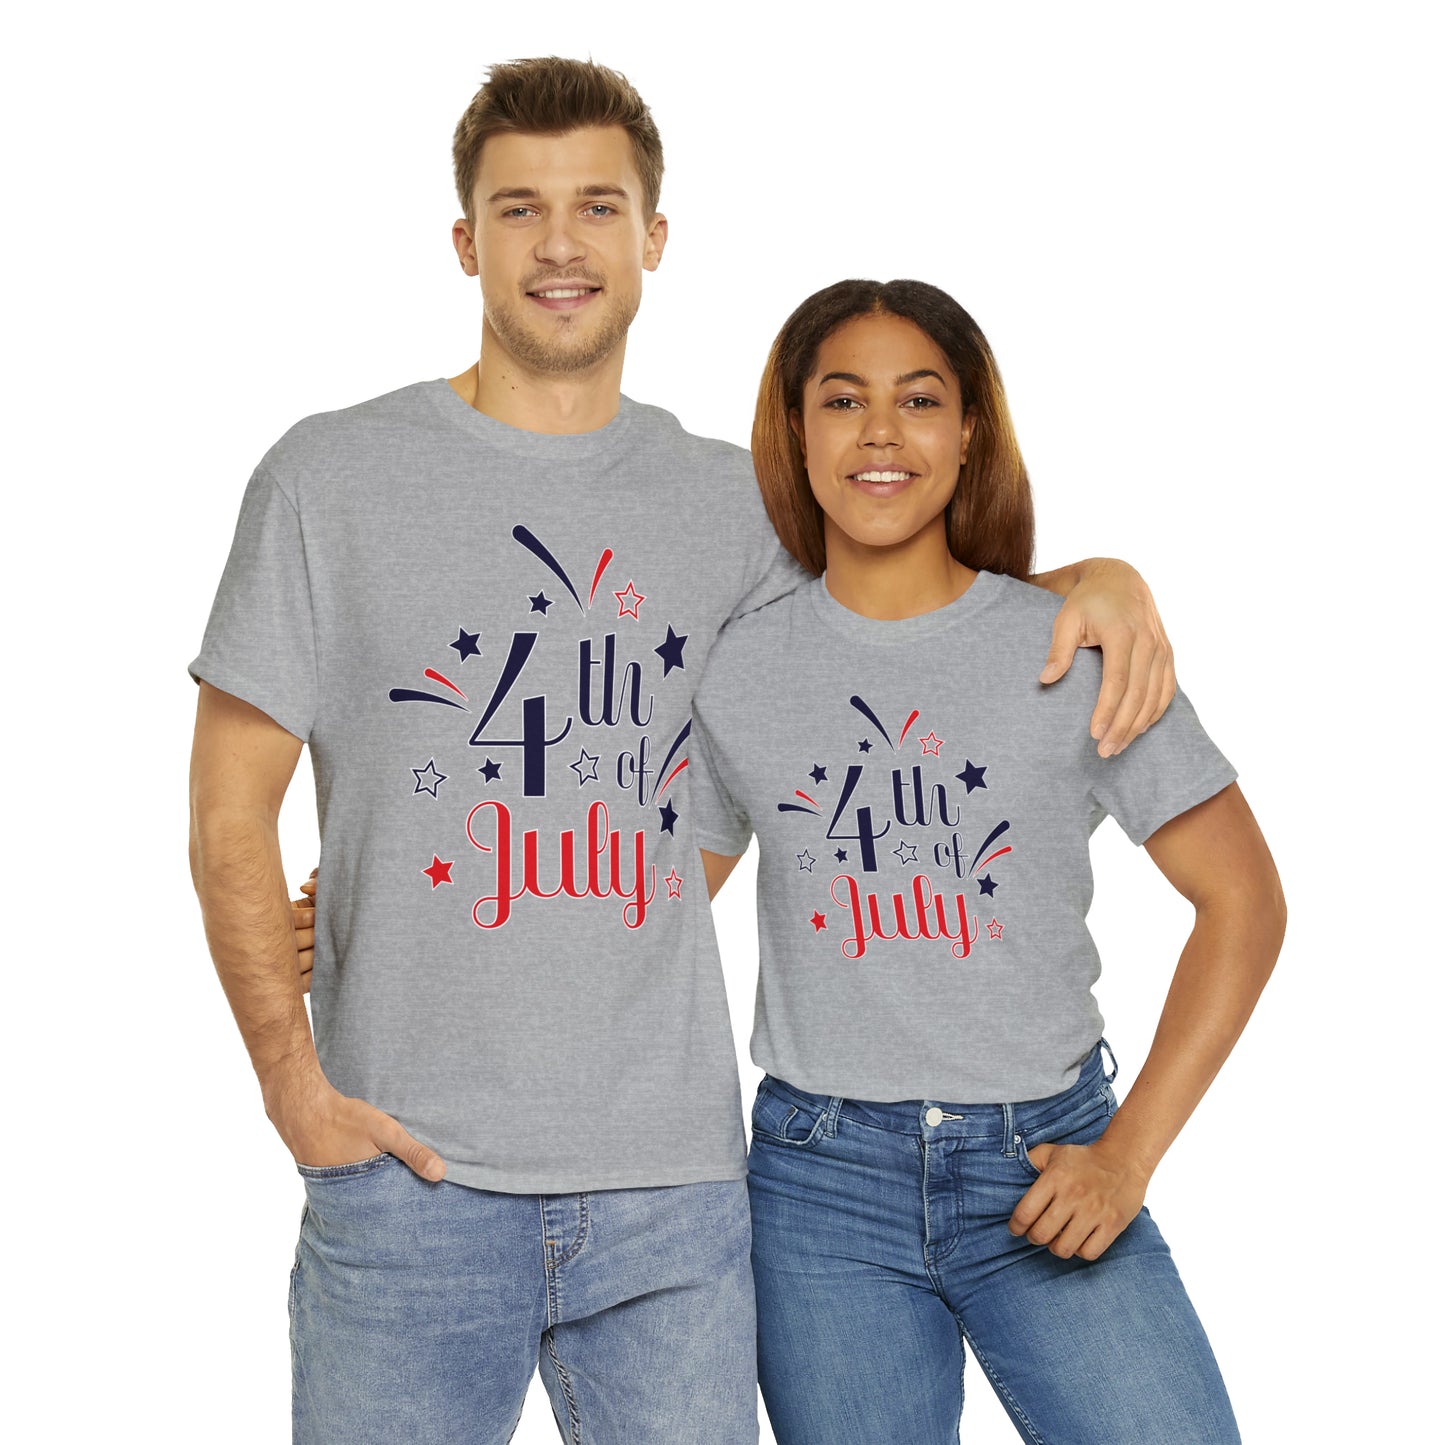 Mock up of a man and a woman wearing the Sport Grey t-shirt